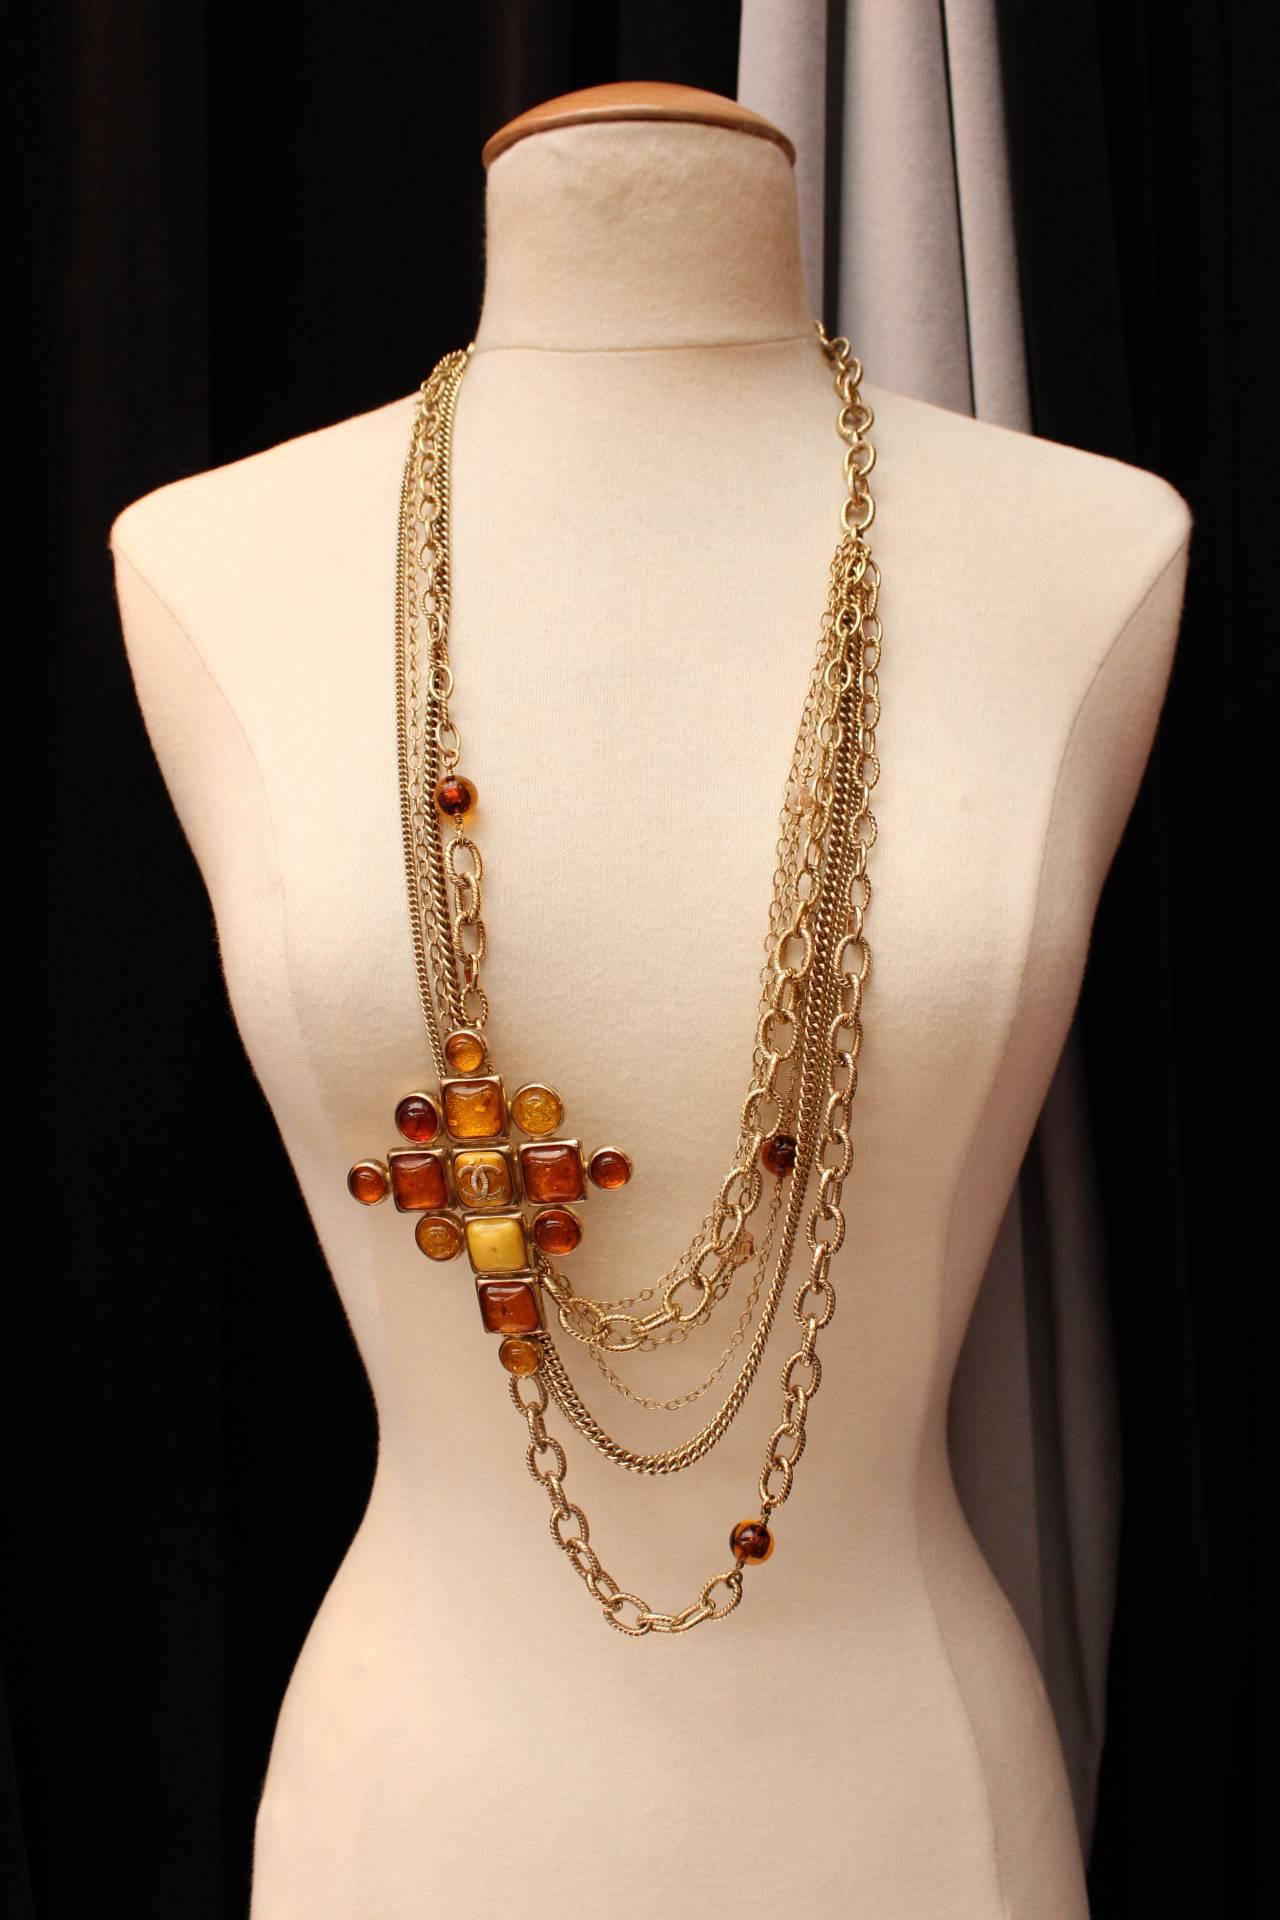 CHANEL (Made in France) Large necklace composed of several strands of chains in light gilt metal adorned with a cross in gilt metal paved with glass paste square and round cabochons in orange, amber and yellow colors. 

The center cabochon